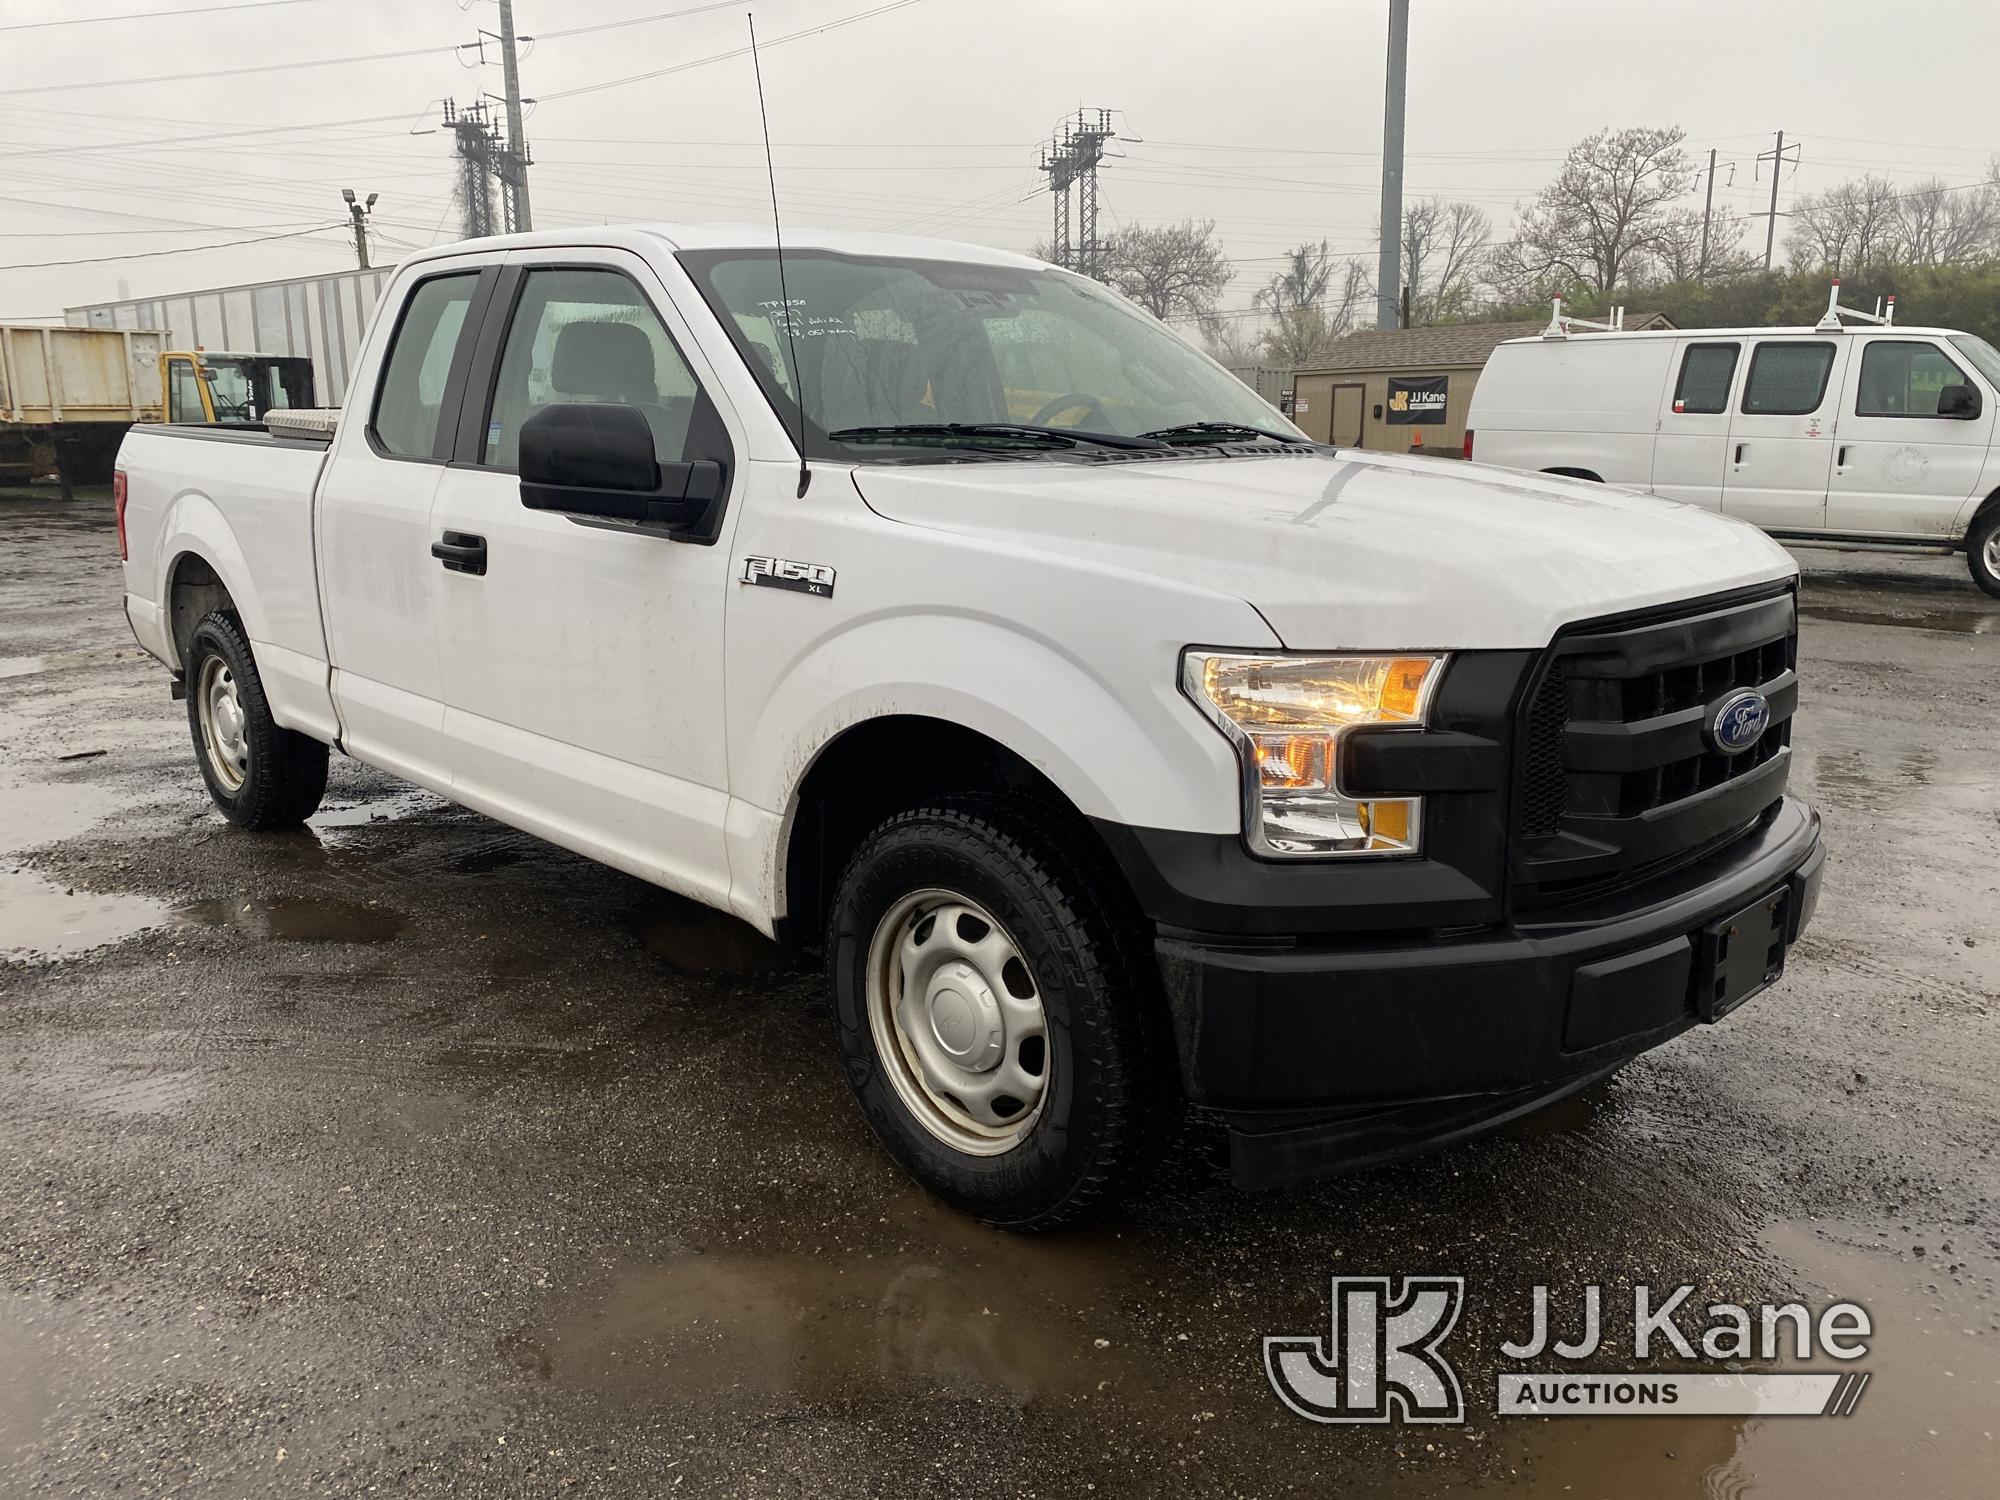 (Plymouth Meeting, PA) 2017 Ford F150 Extended-Cab Pickup Truck Runs & Moves, Body & Rust Damage